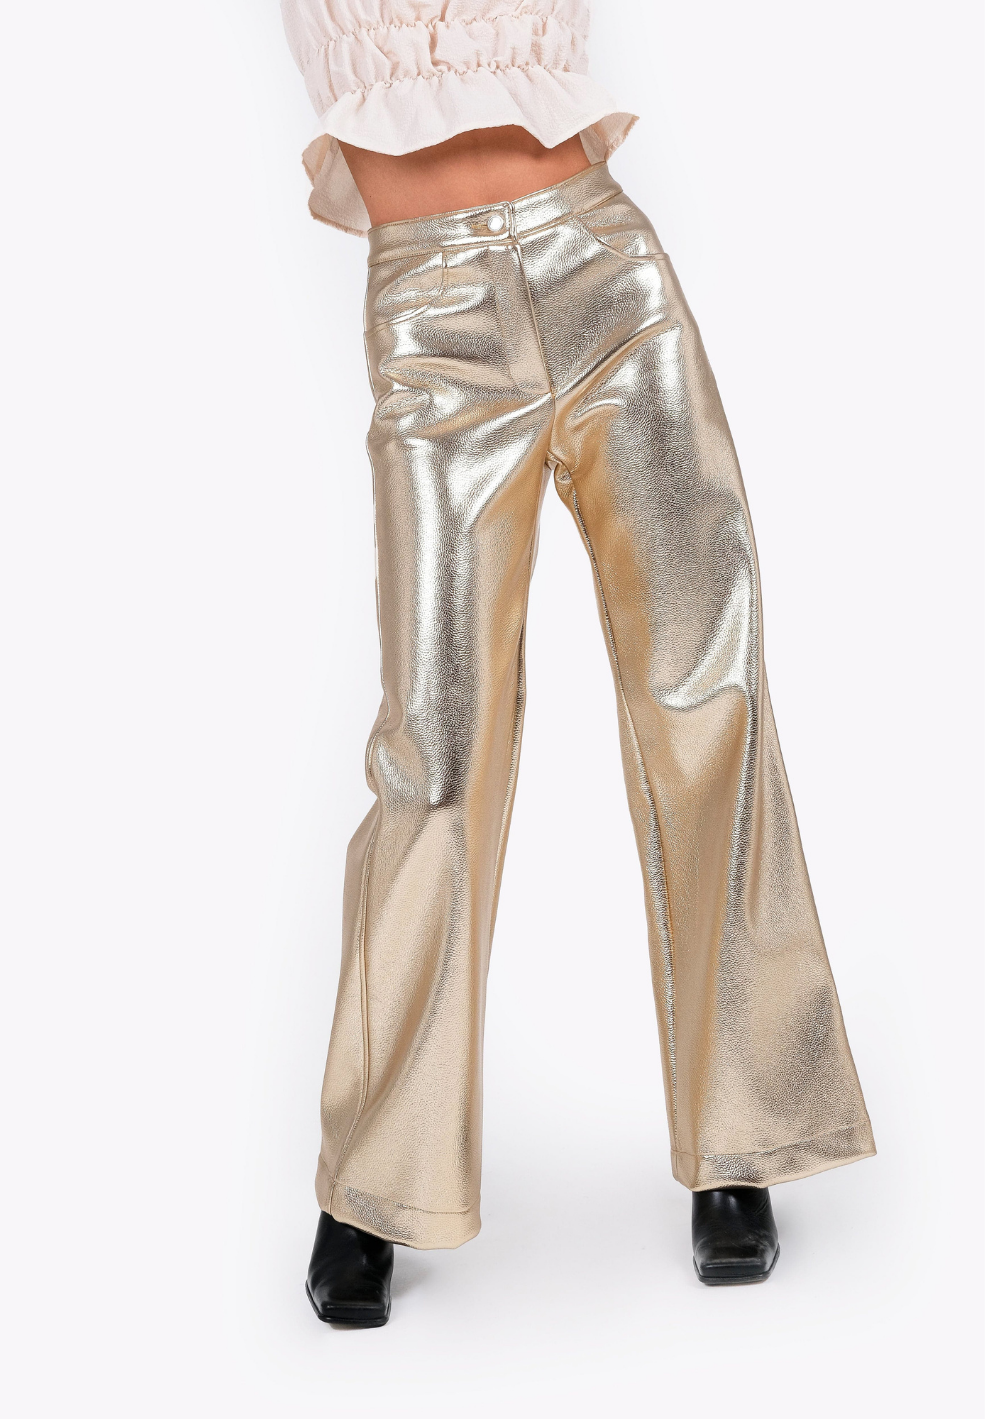 Studio 54 Vegan Leather Pants Gold - By Laagam - Shop online on